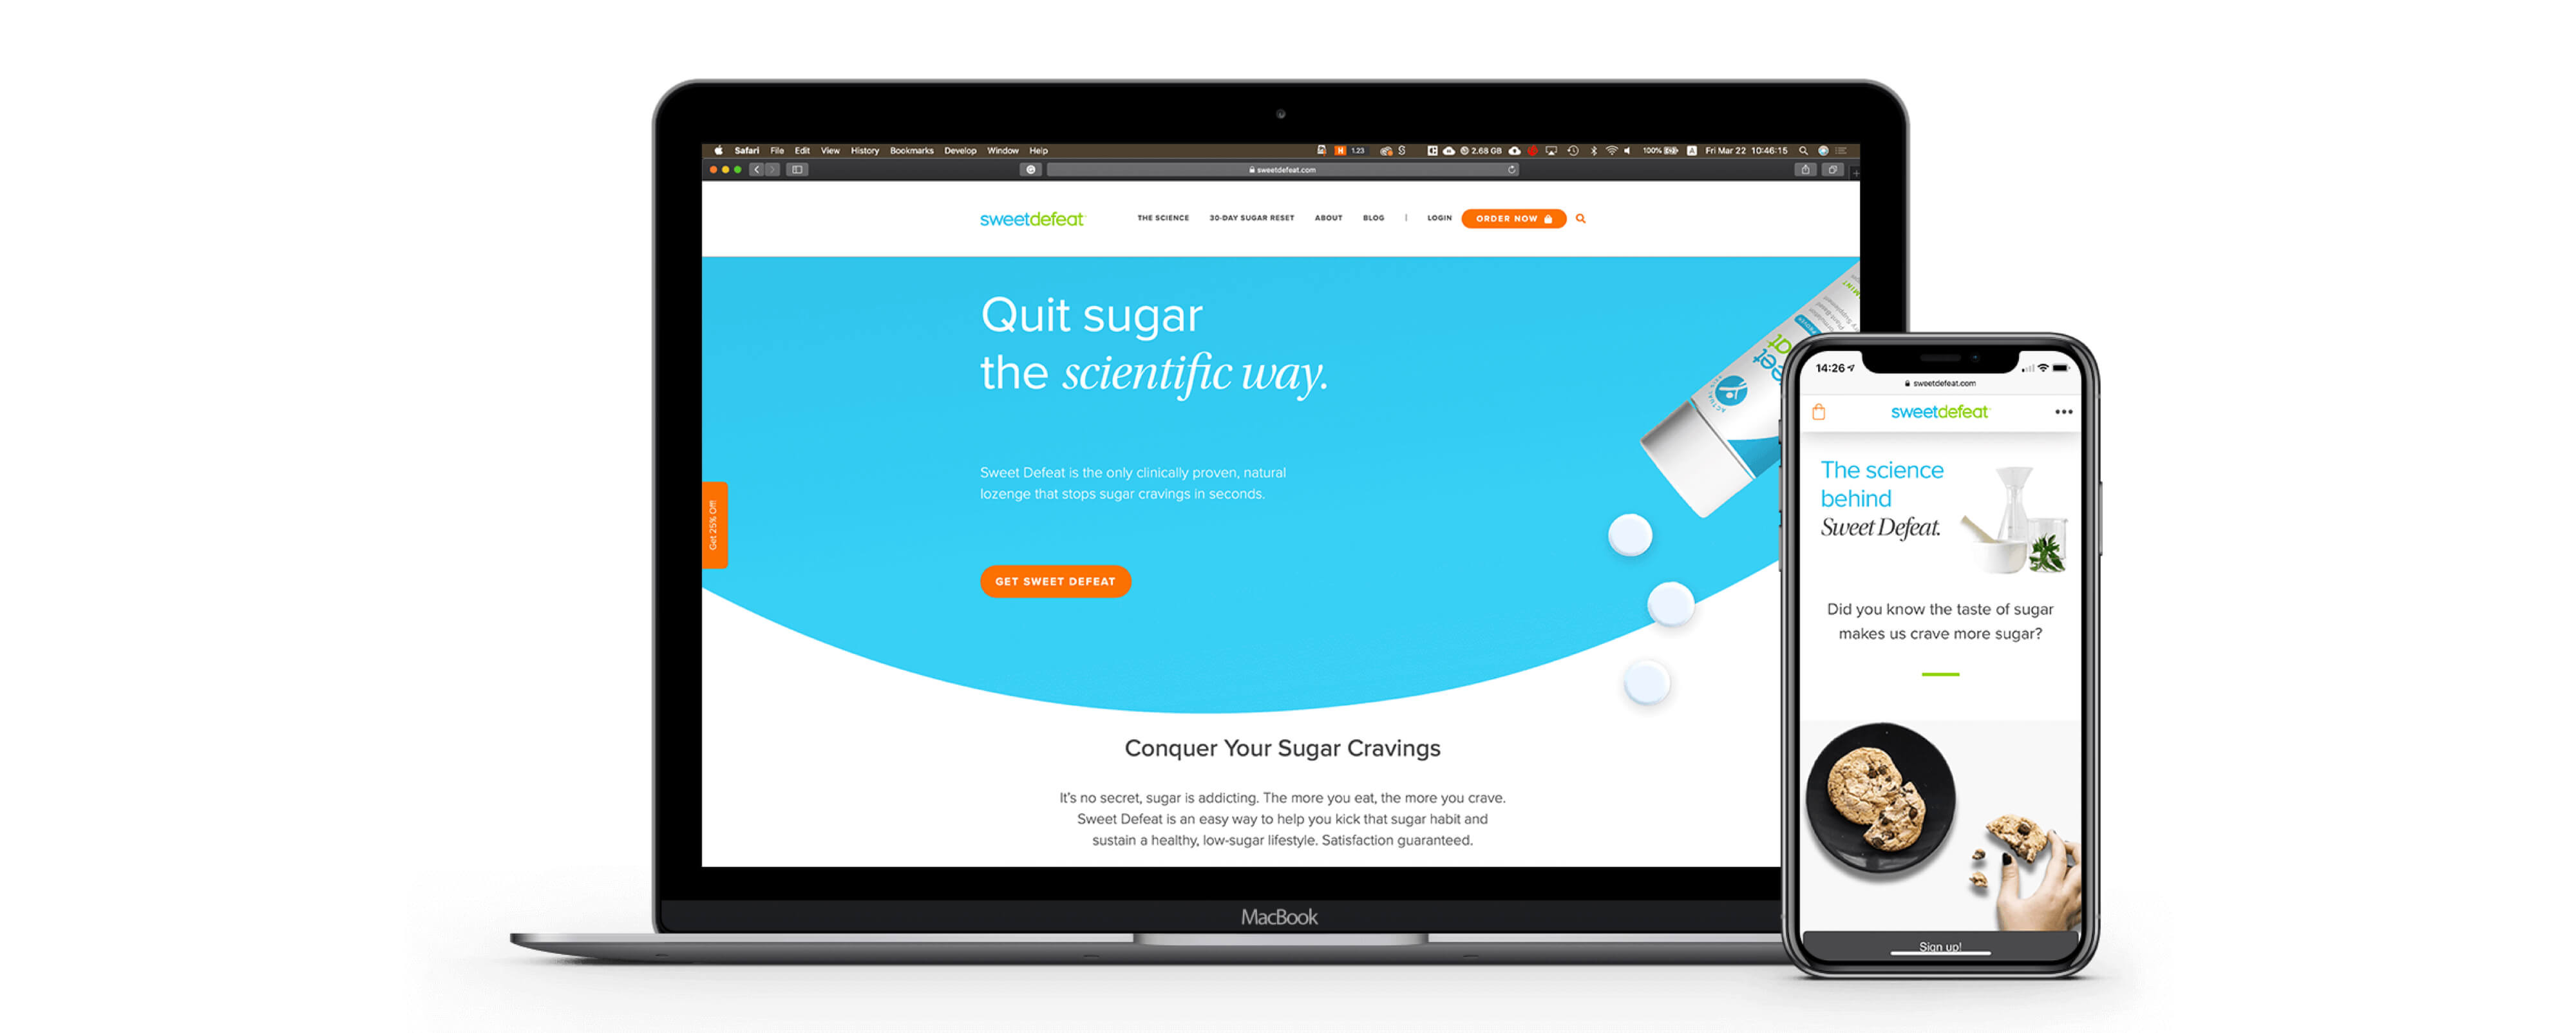 sweet defeat website design mockup on laptop and mobile phone